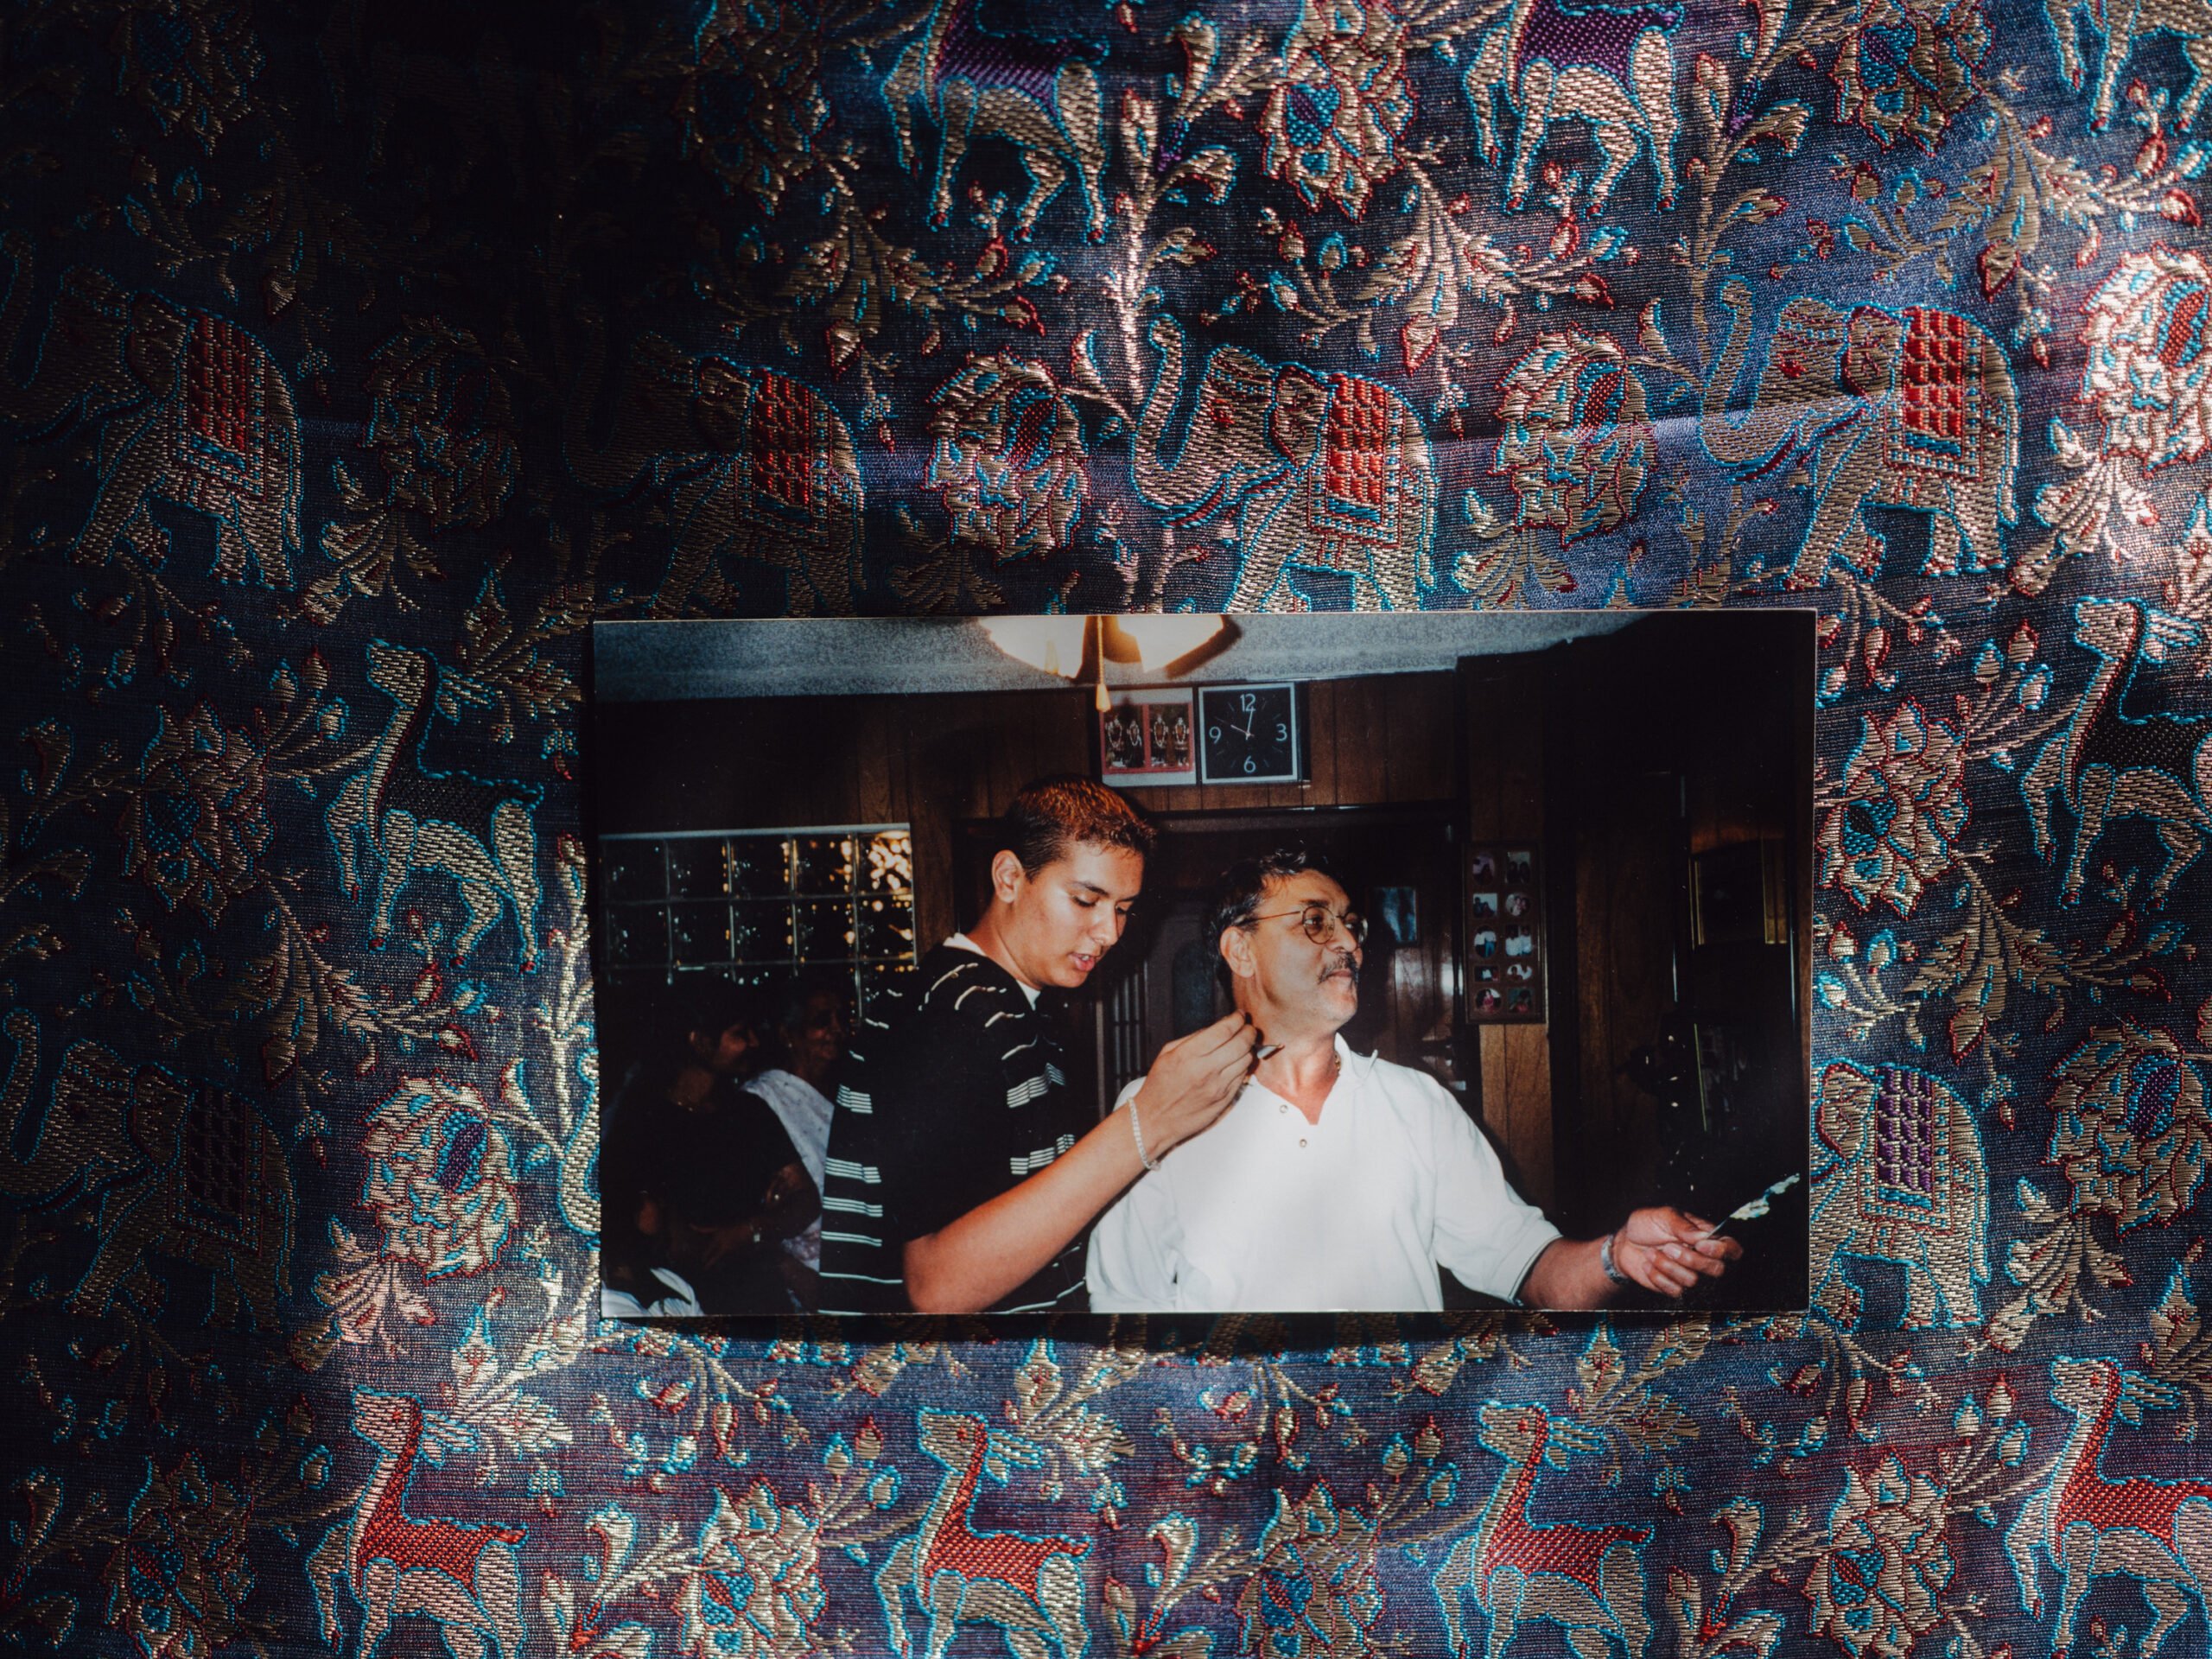 Against the backdrop of a blue sari fabric, a color photograph of a father and son, Hasmukh Patel and Mitesh Patel, posing at the father's 50th birthday.